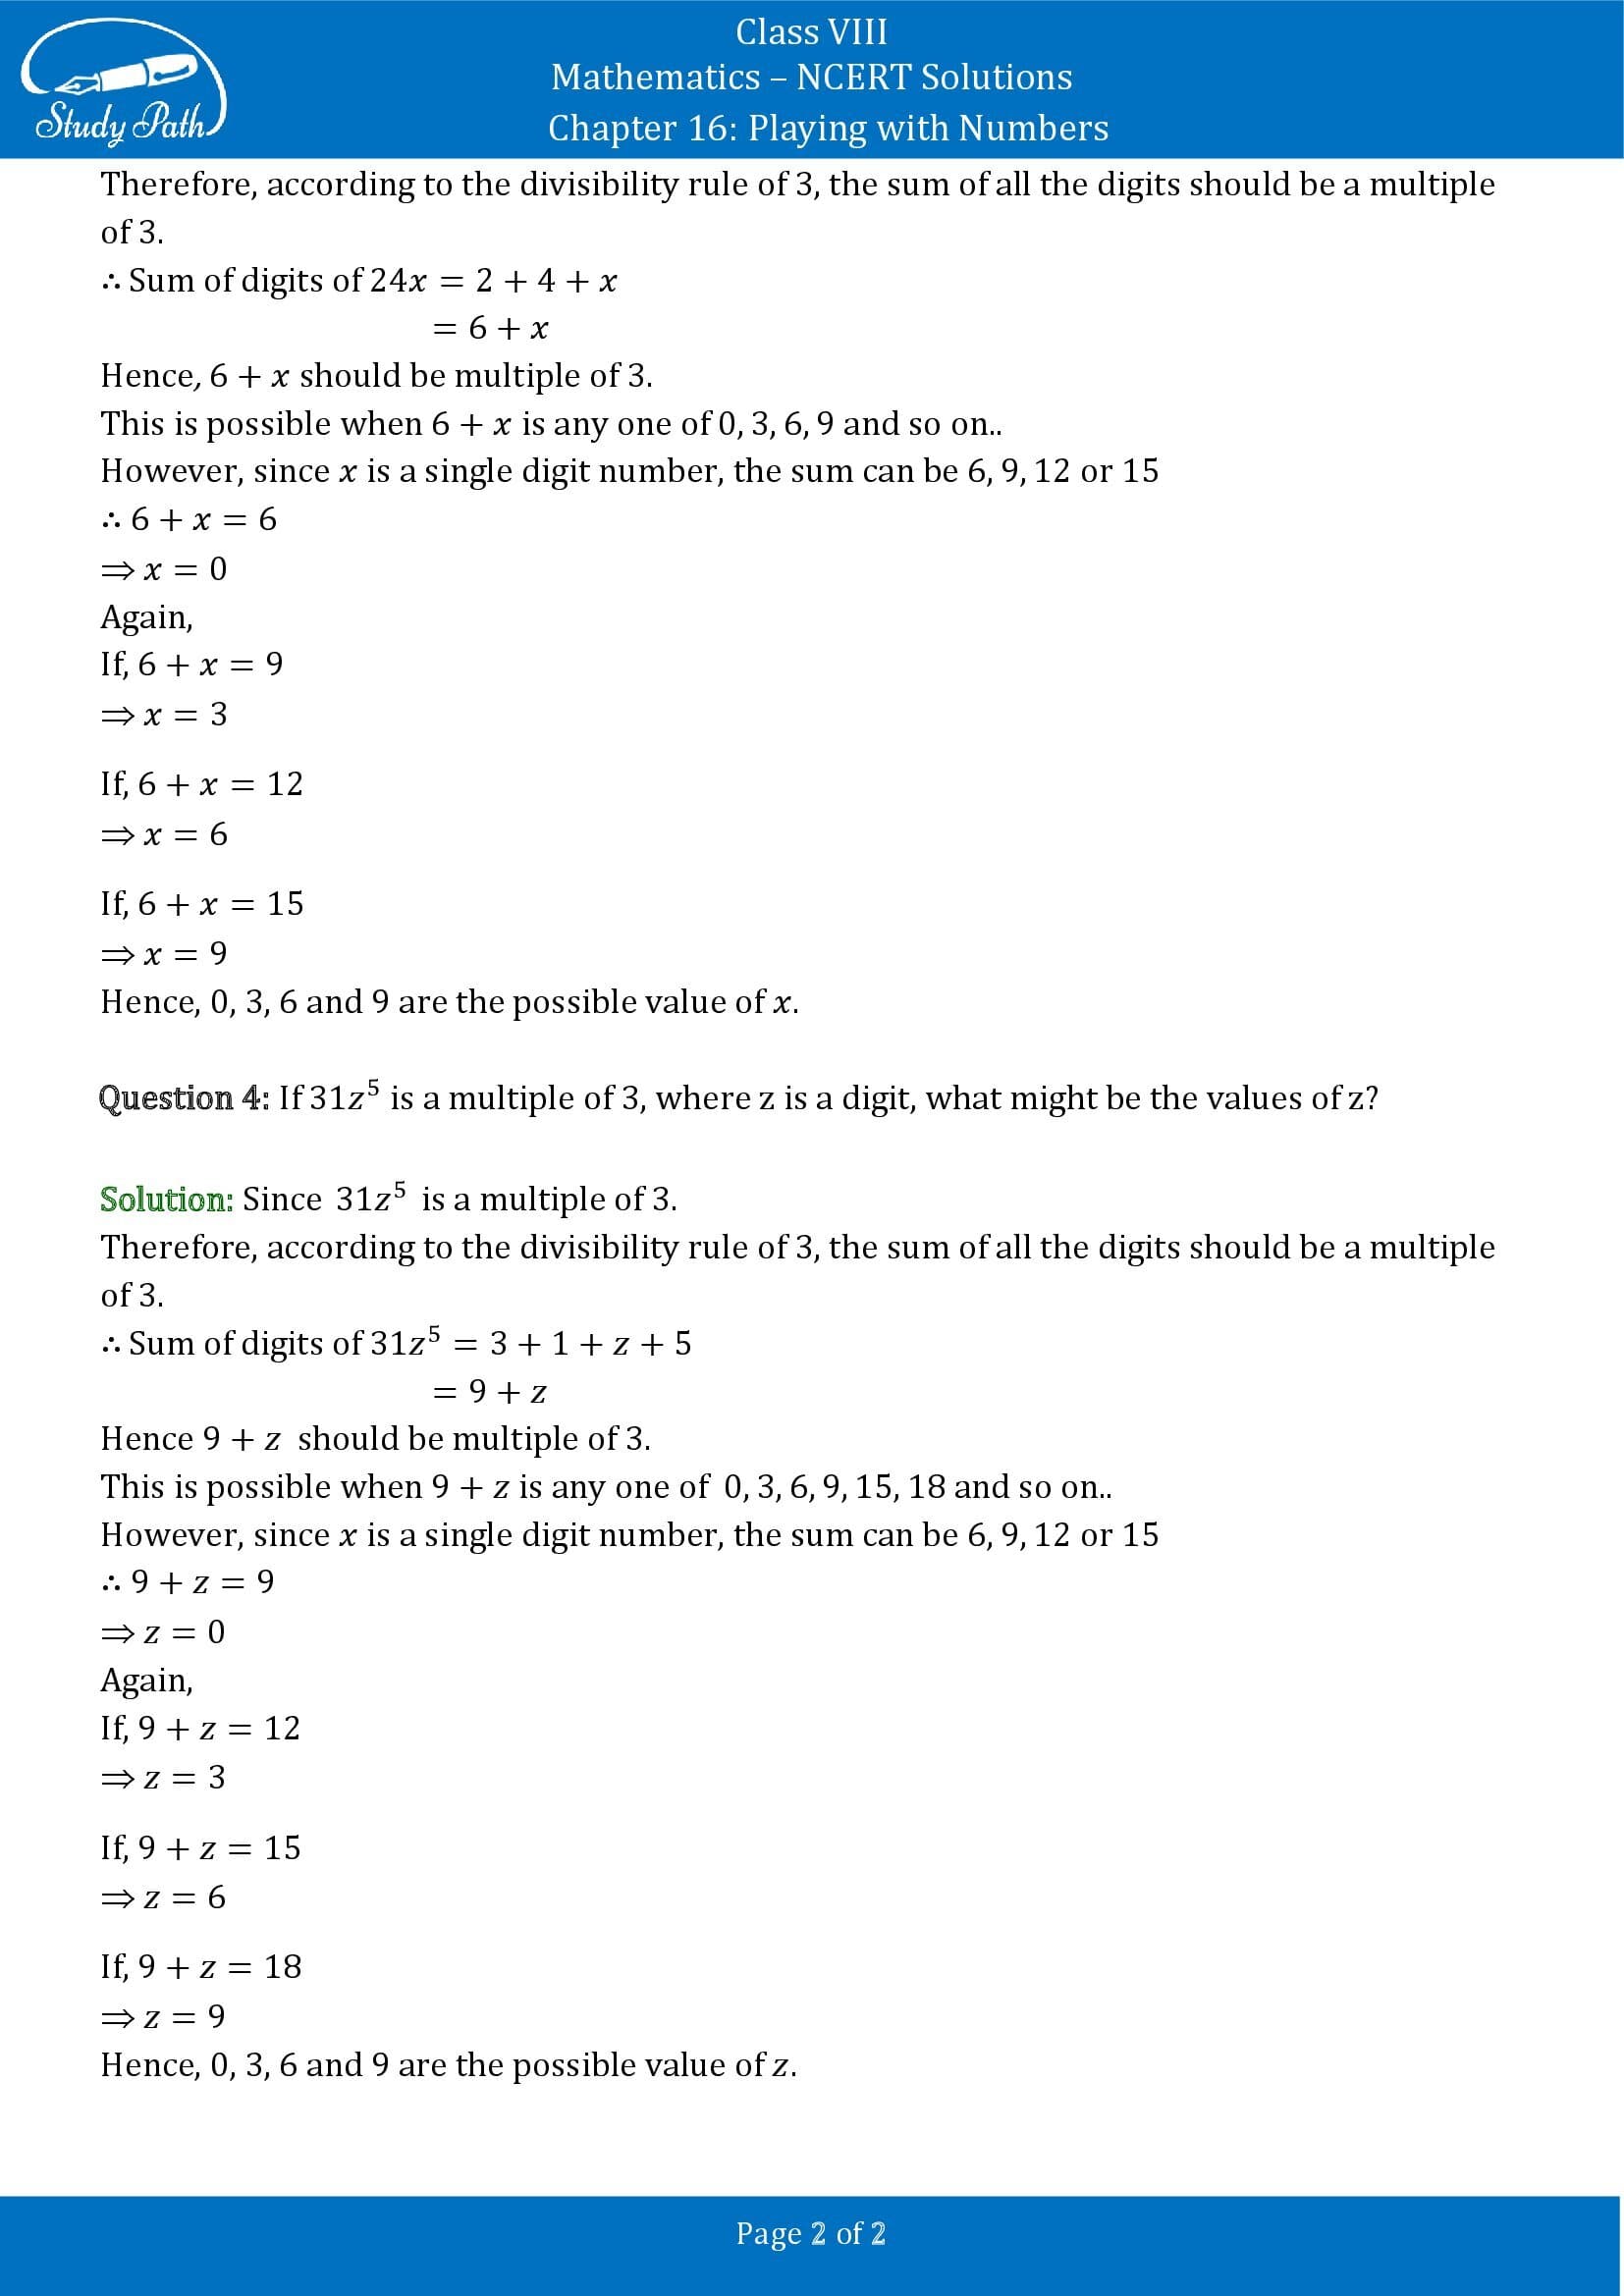 NCERT Solutions for Class 8 Maths Chapter 16 Playing with Numbers Exercise 16.2 00002